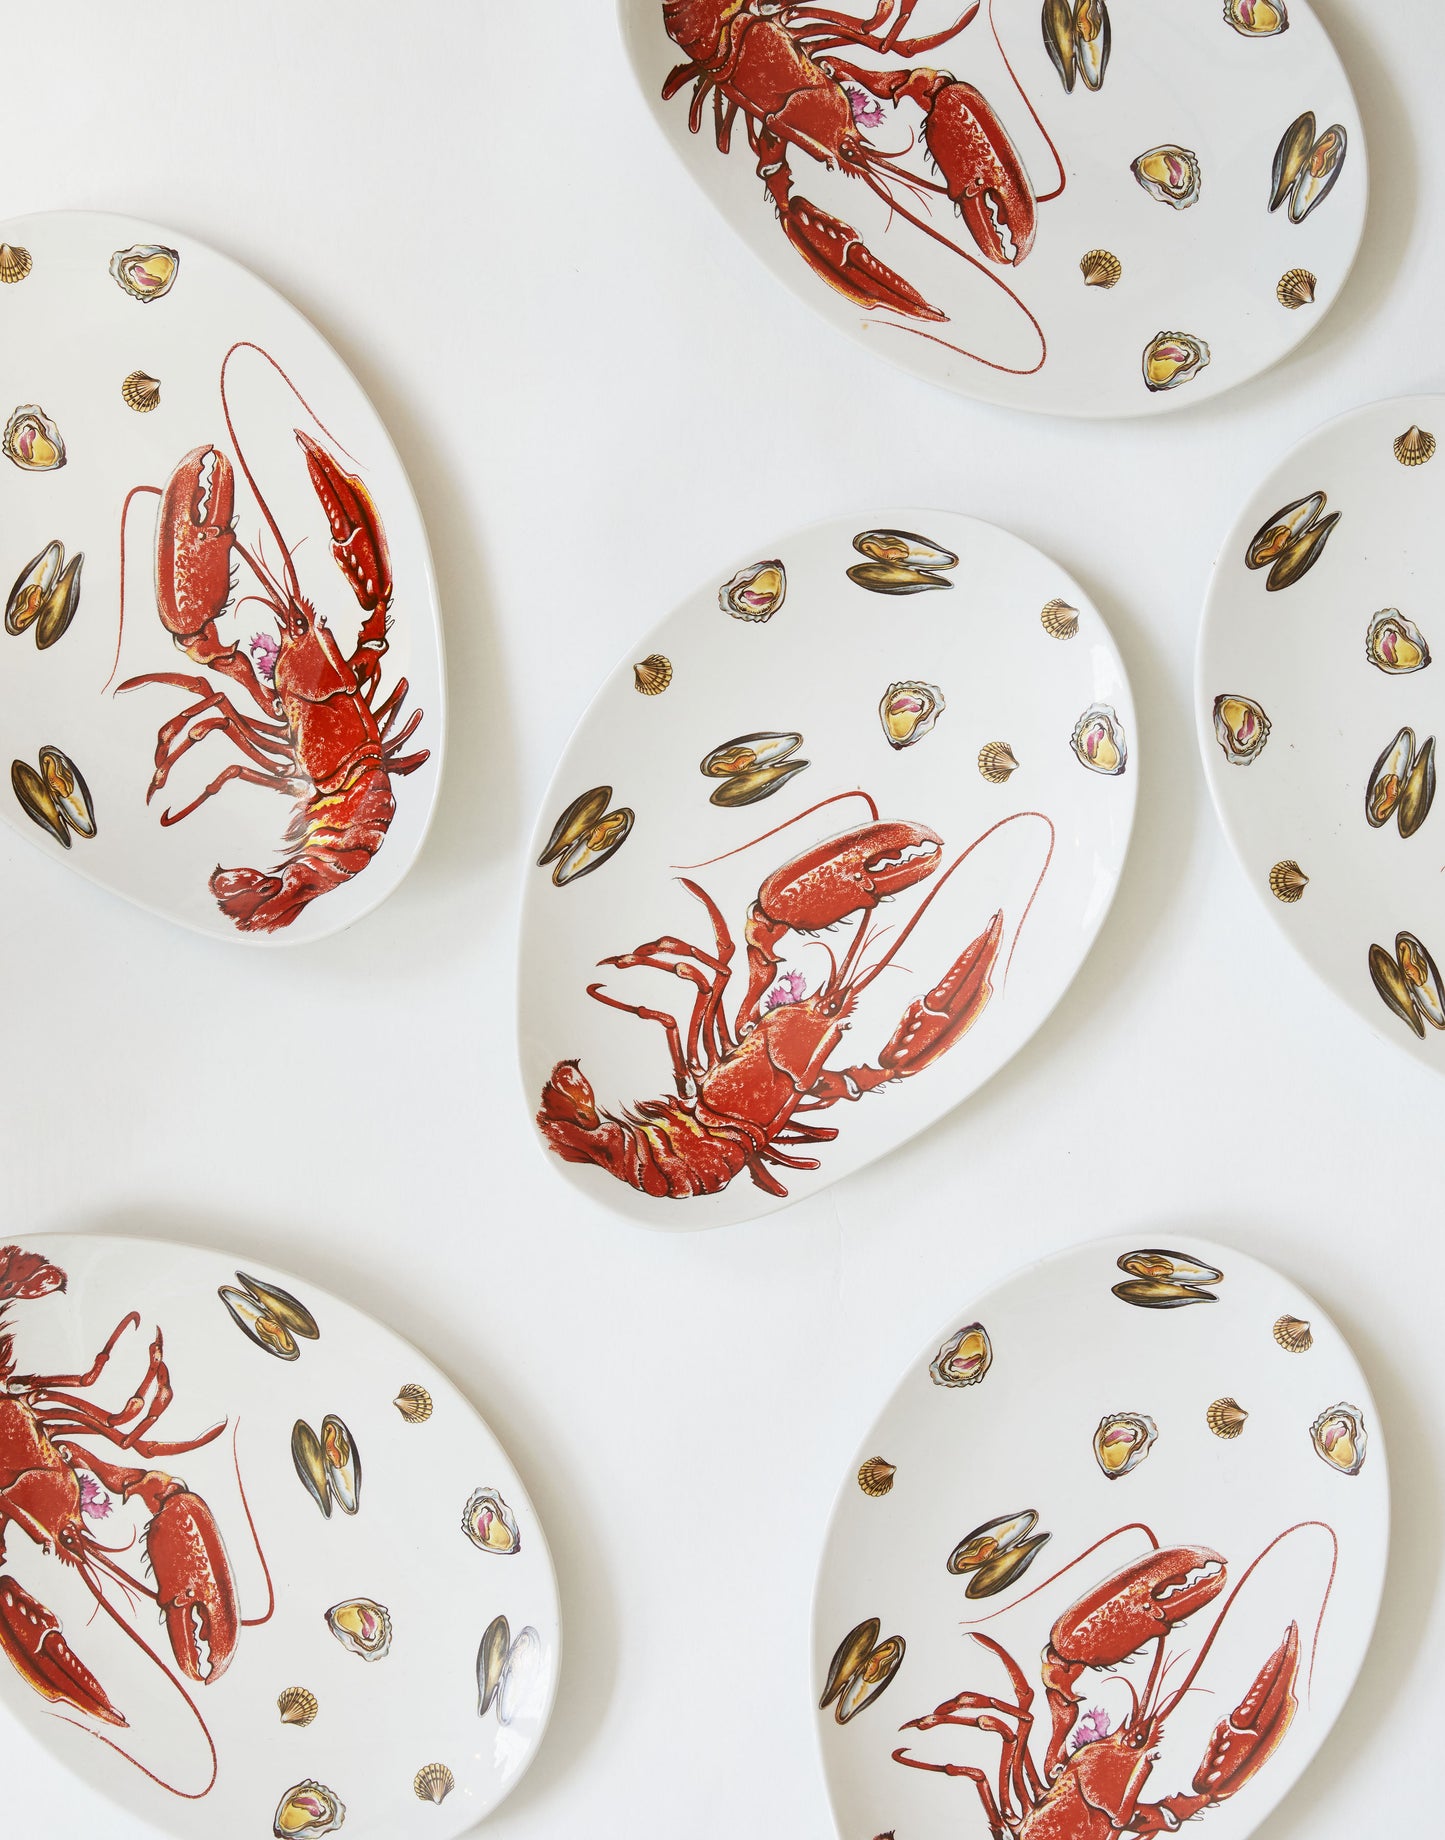 A Set of Six 1930’s Ultra-vitrified Large Oval Lobster Platters Made by John Maddock & Son pottery